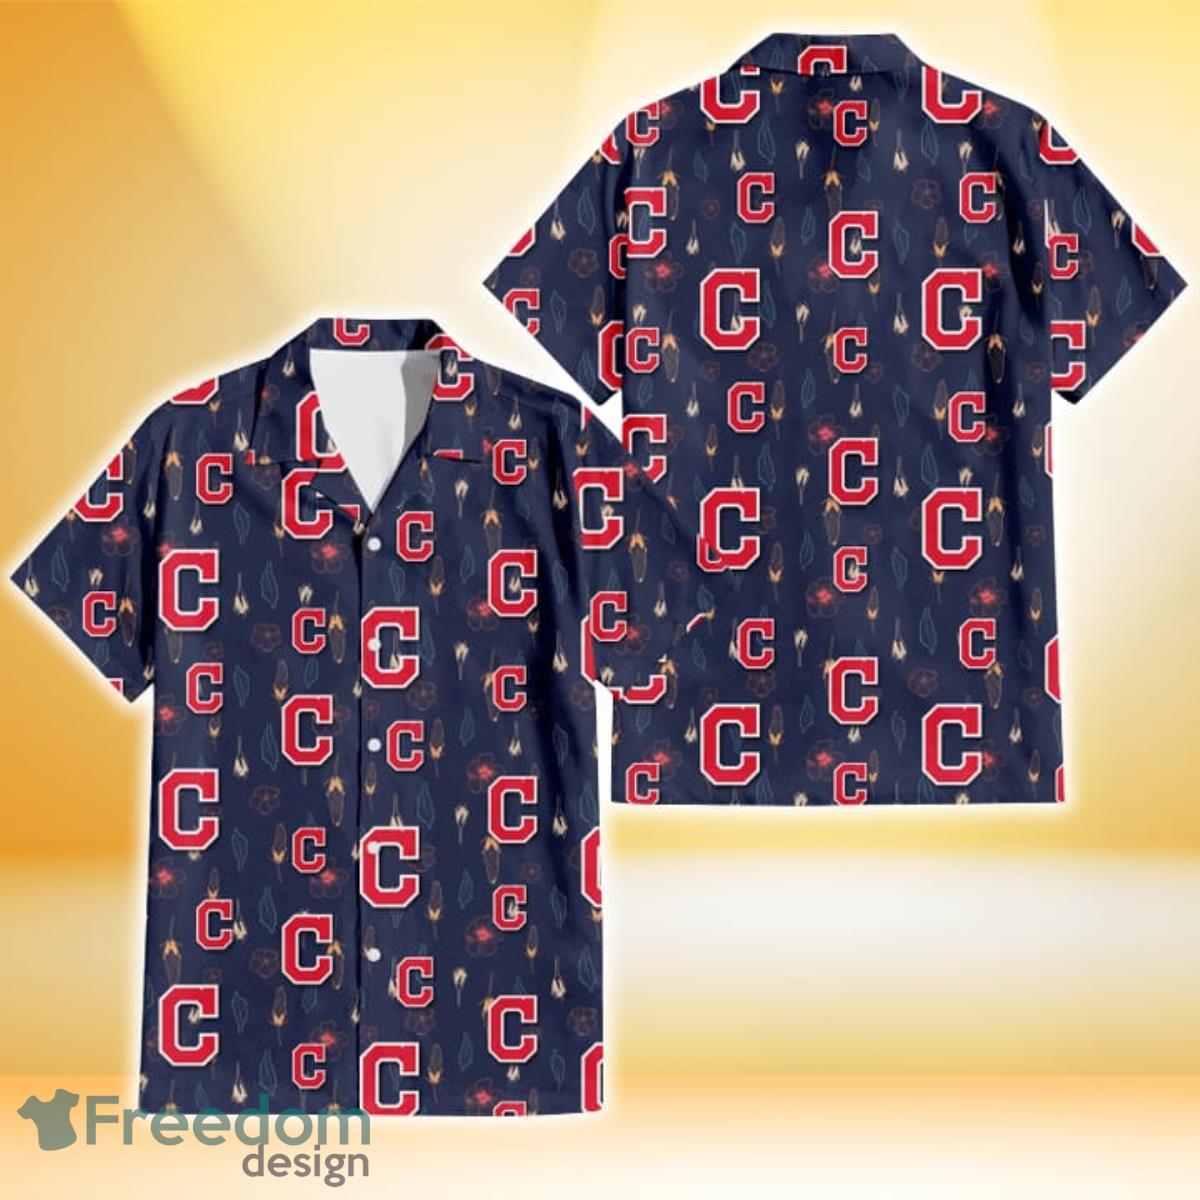 Cleveland Indians Thistle Sketch Hibiscus Dark Slate Blue Background 3D  Hawaiian Shirt Gift For Fans - Freedomdesign